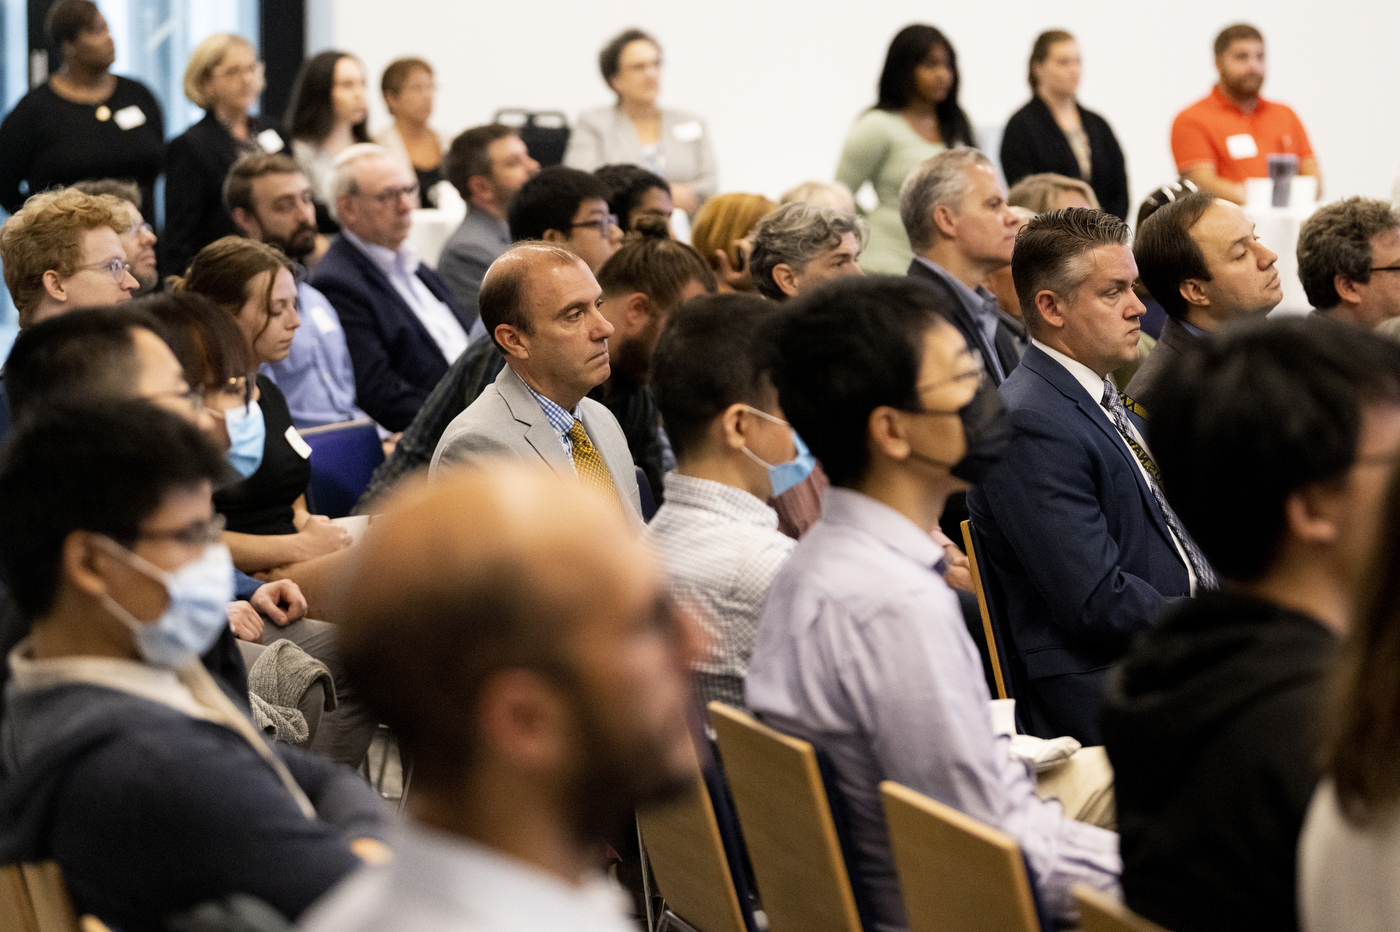 A crowd of experts part of the field of quantum technology sit together in a large room.